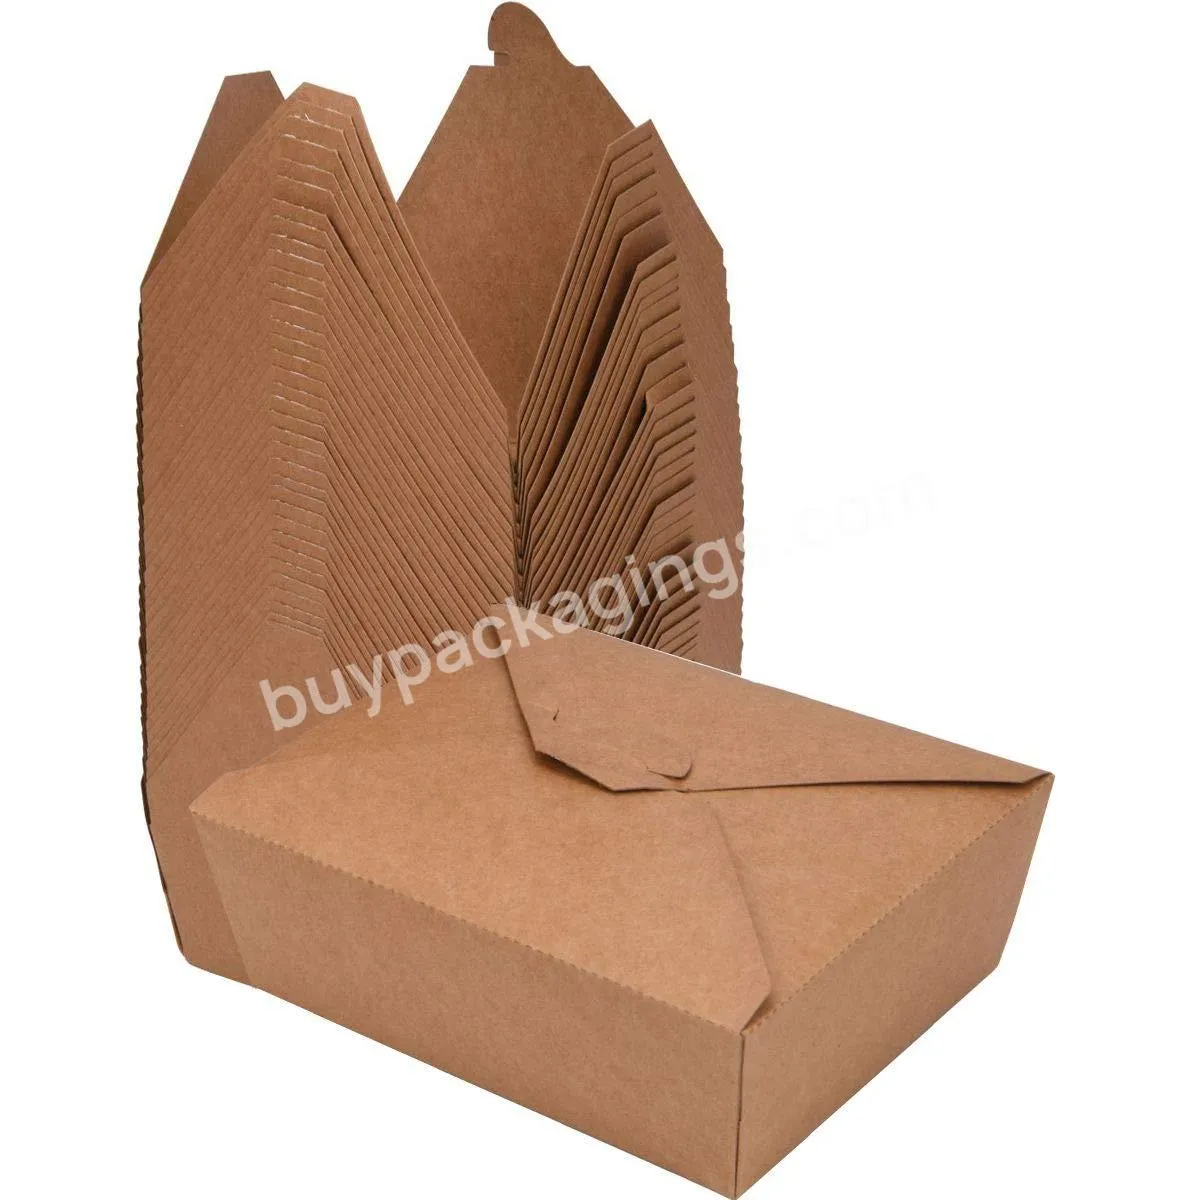 Hot Selling Kraft Paper Food Grade To Go Boxes Restaurant Disposable Food Take Away Lunch Packing Boxes Takeaway Food Box - Buy Hot Selling Kraft Paper Food Grade To Go Boxes Restaurant Disposable Food Take Away Lunch Packing Boxes Takeaway Food Box,